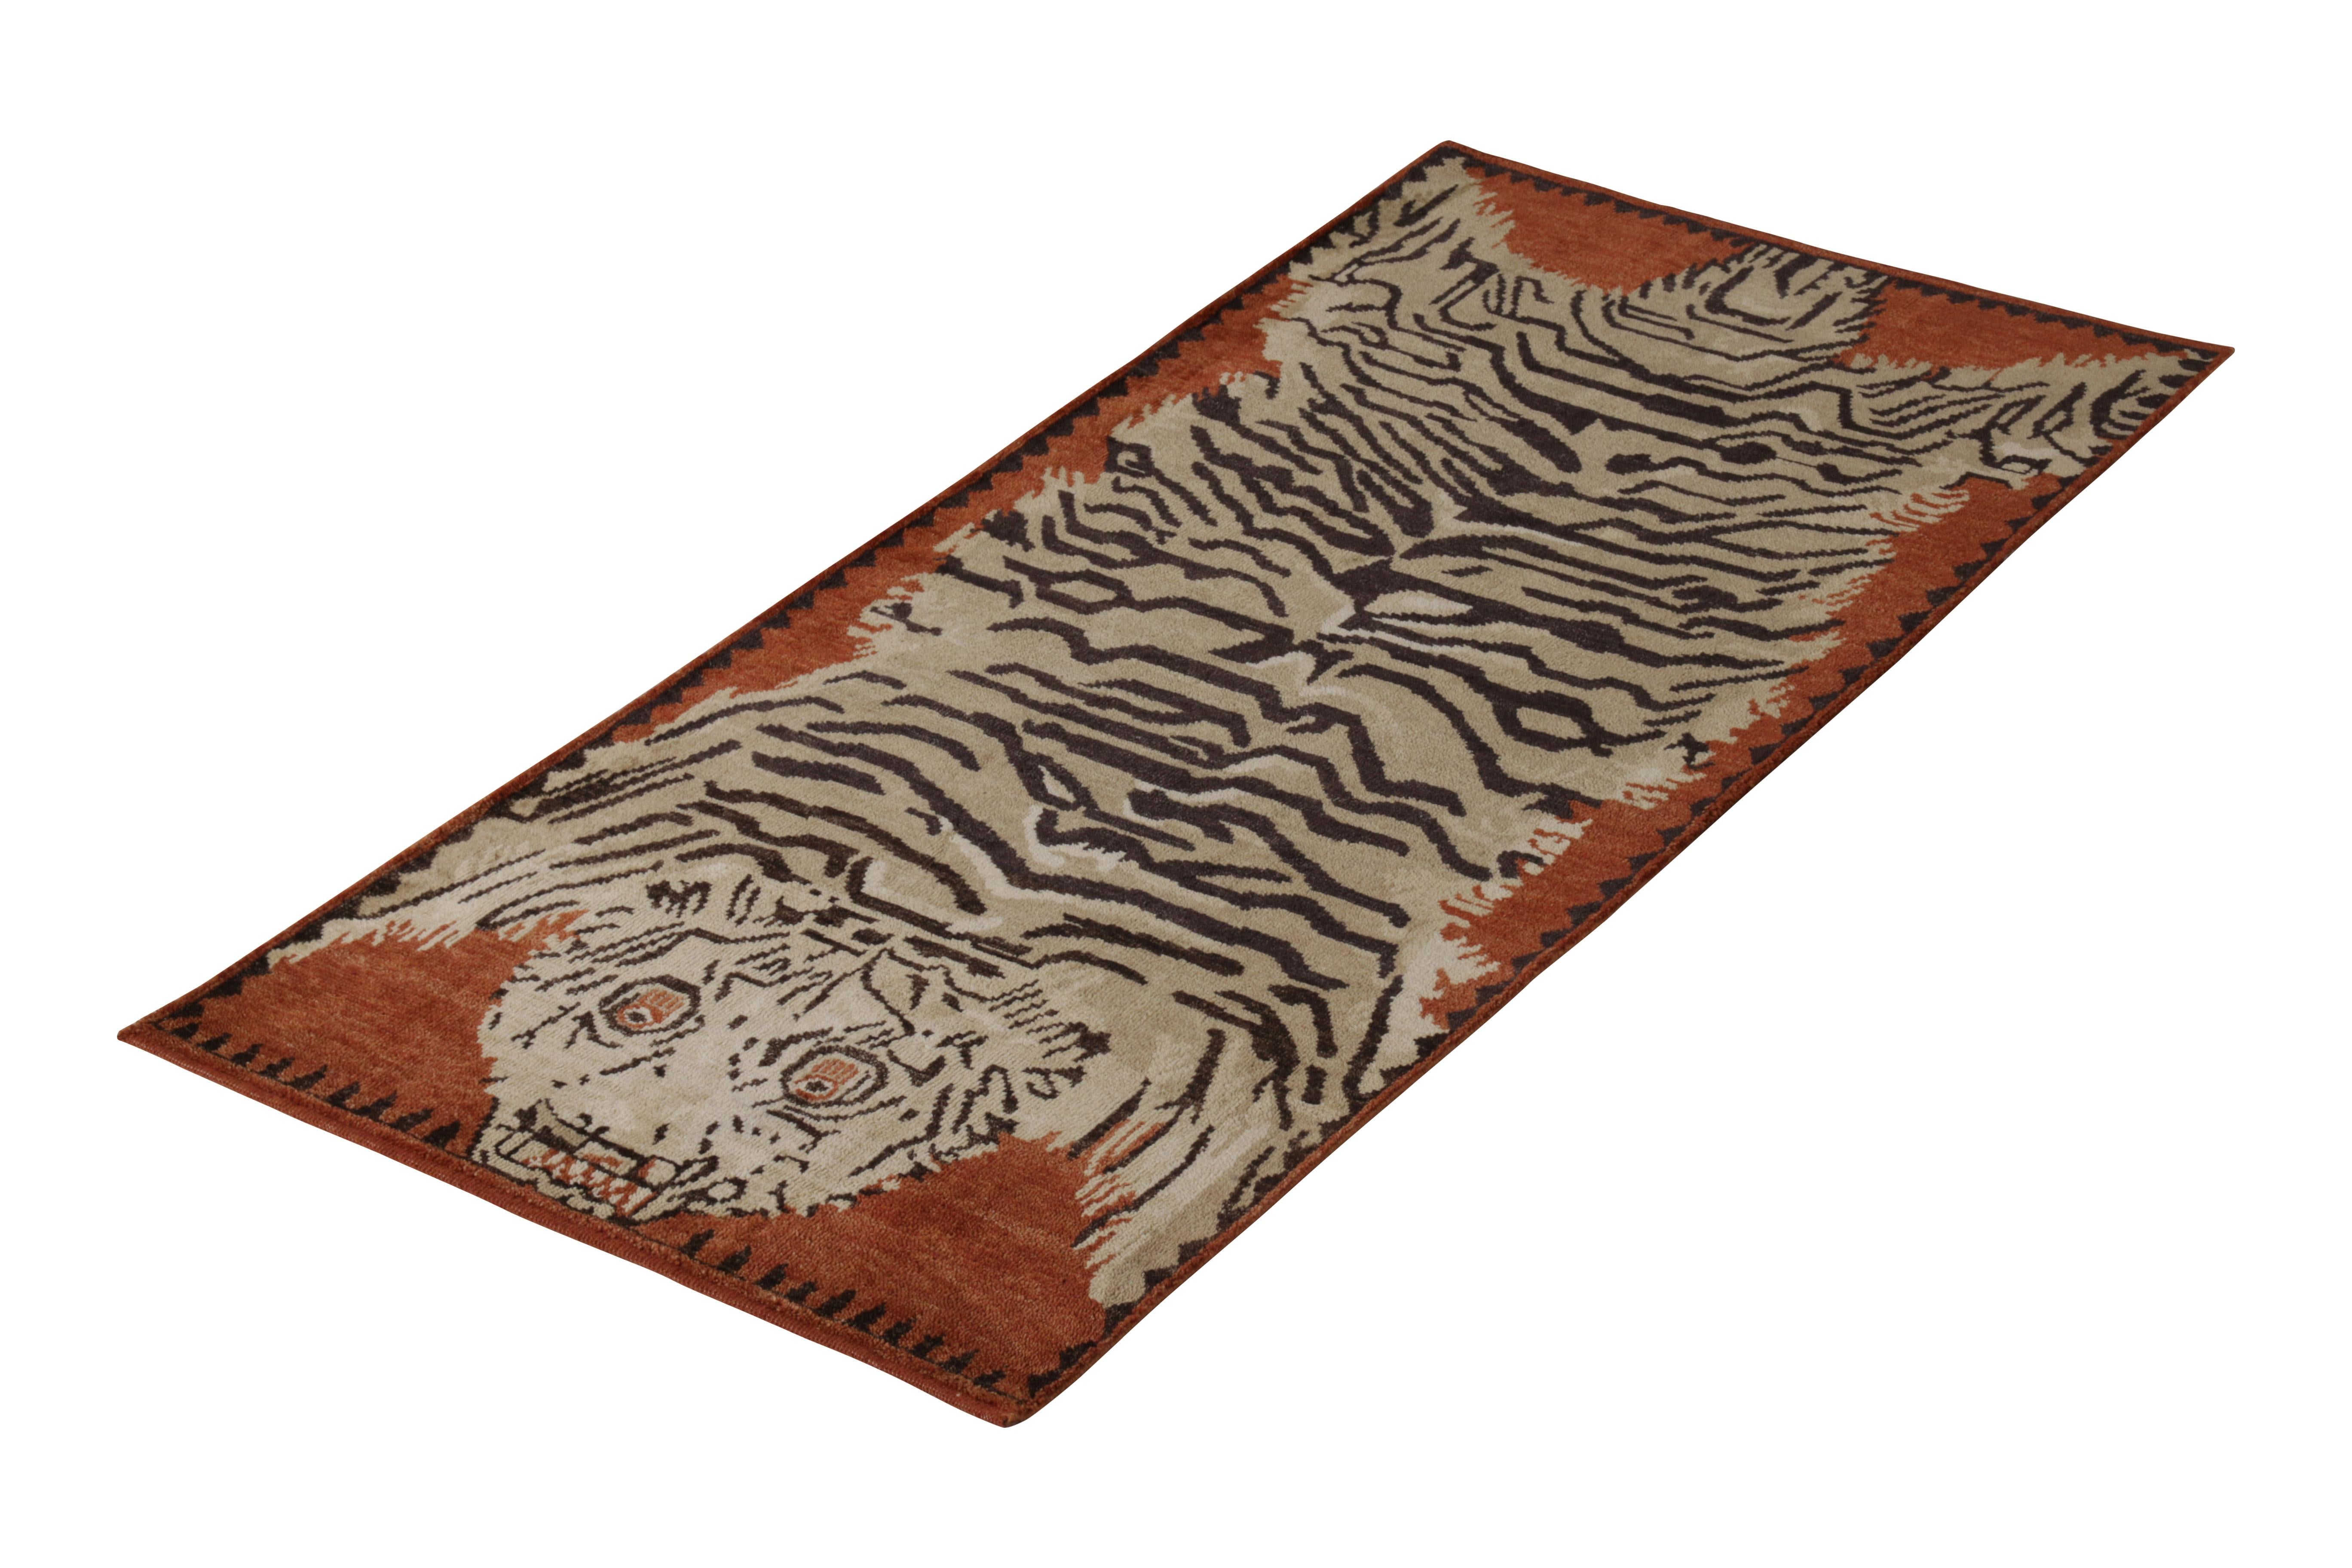 A 3x7 runner from the Burano Collection by Rug & Kilim, recapturing classic inspirations like that of this classic Tibetan Tiger rug in the antique pictorial rug style. Hand knotted in notably soft Ghazni wool and a proprietary blend of yarns in